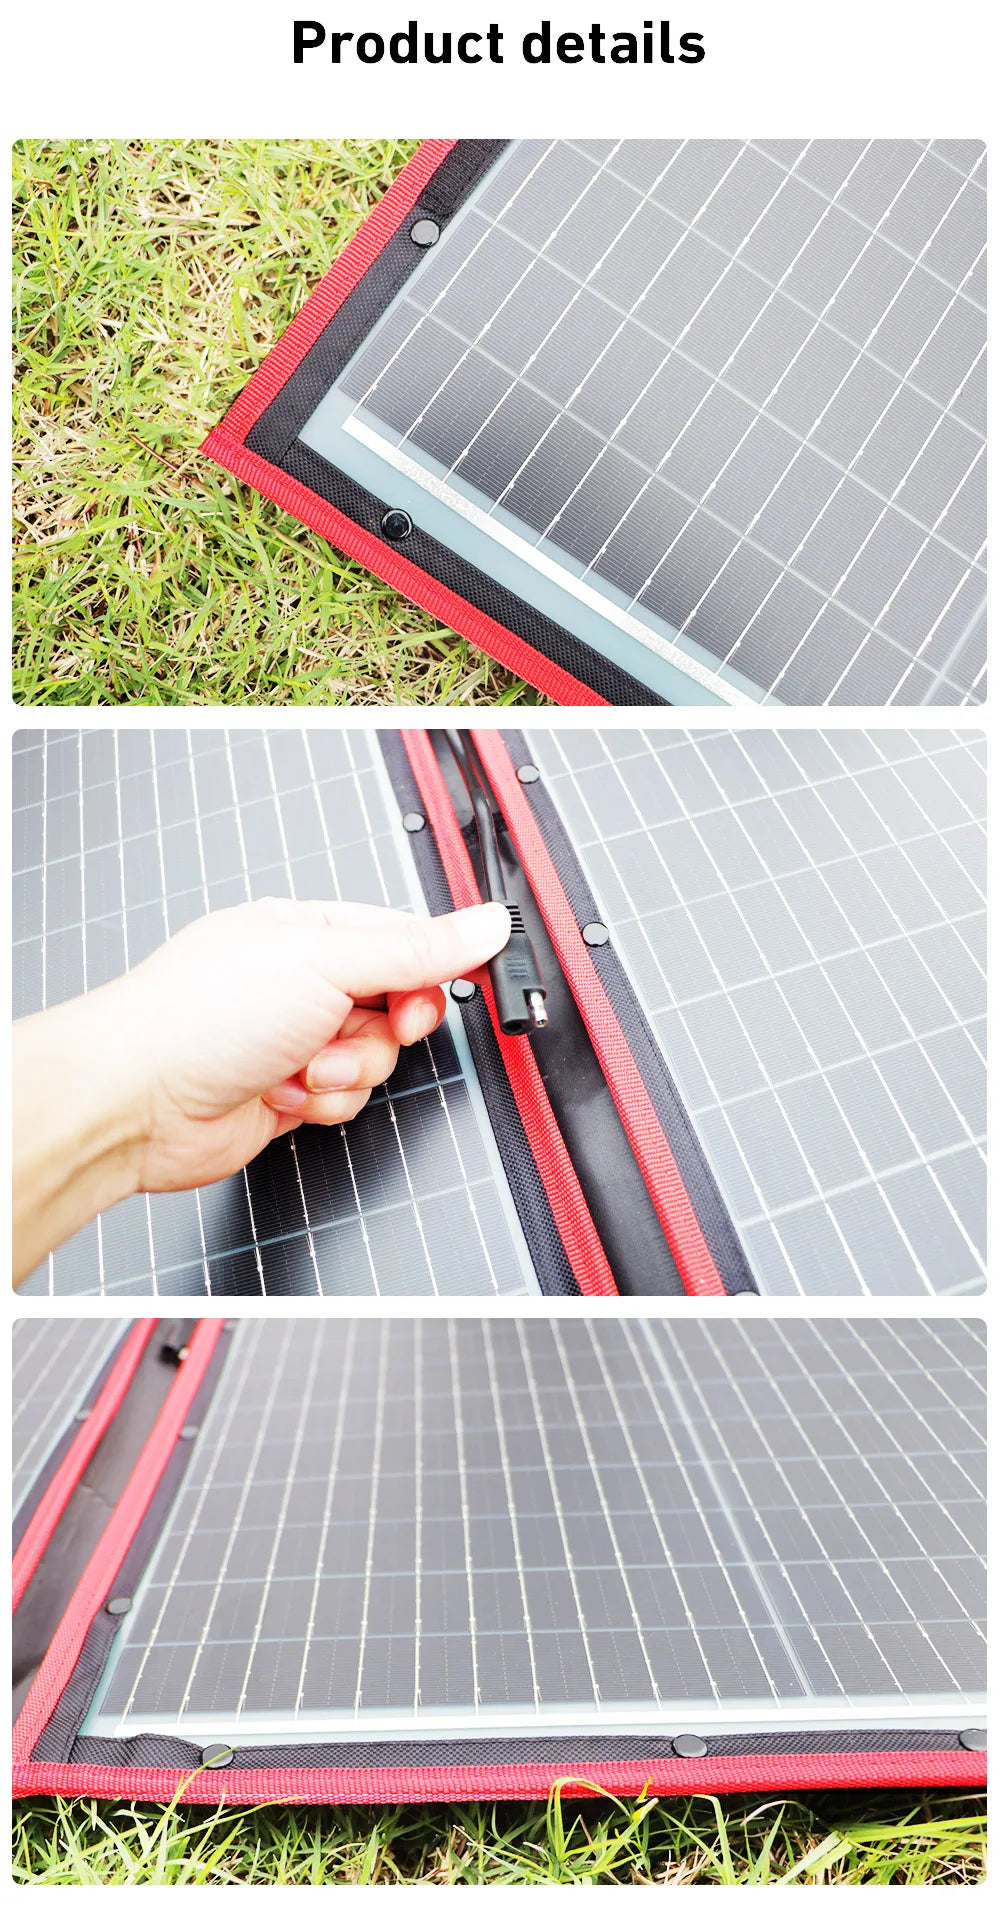 DOKIO 18V 100W 300W Portable Ffolding Solar Panel, Corrosion-resistant, high-temperature-resistant, stain-resistant, and highly transparent surface materials.